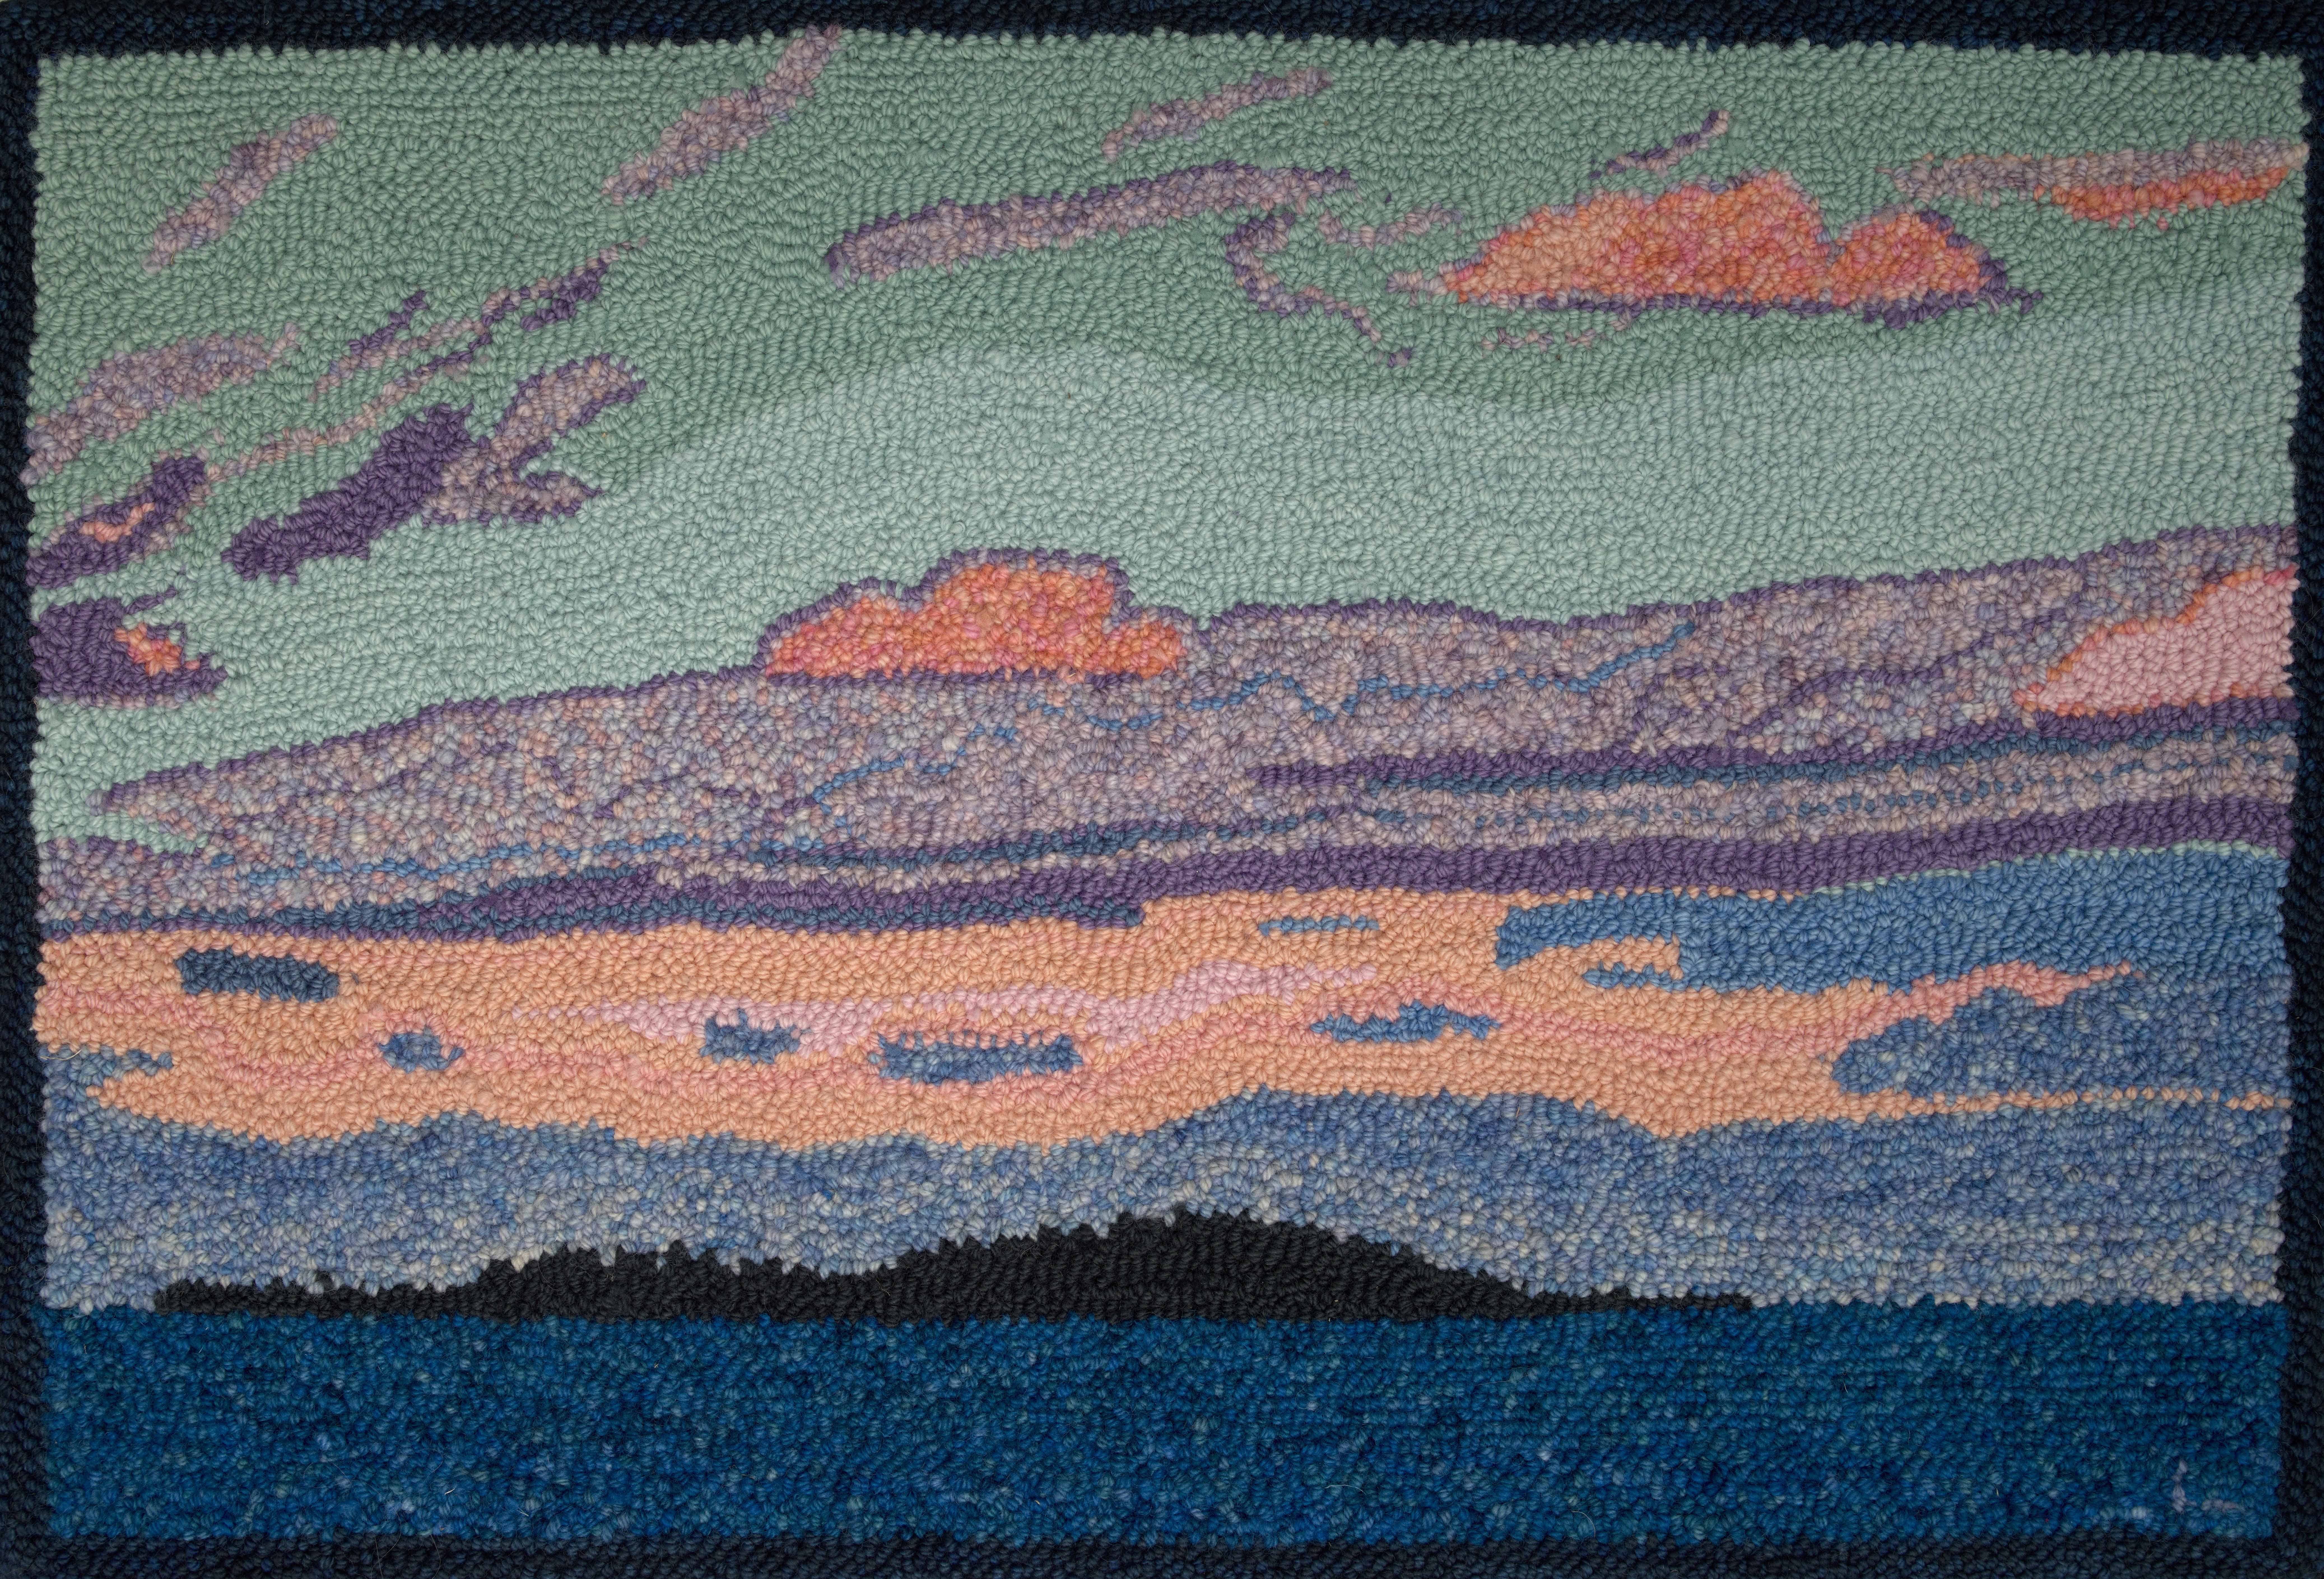 Lindsay Hopkins-Weld, November Sky, 2022, hand-dyed wool on cotton, 25 x 36 inches